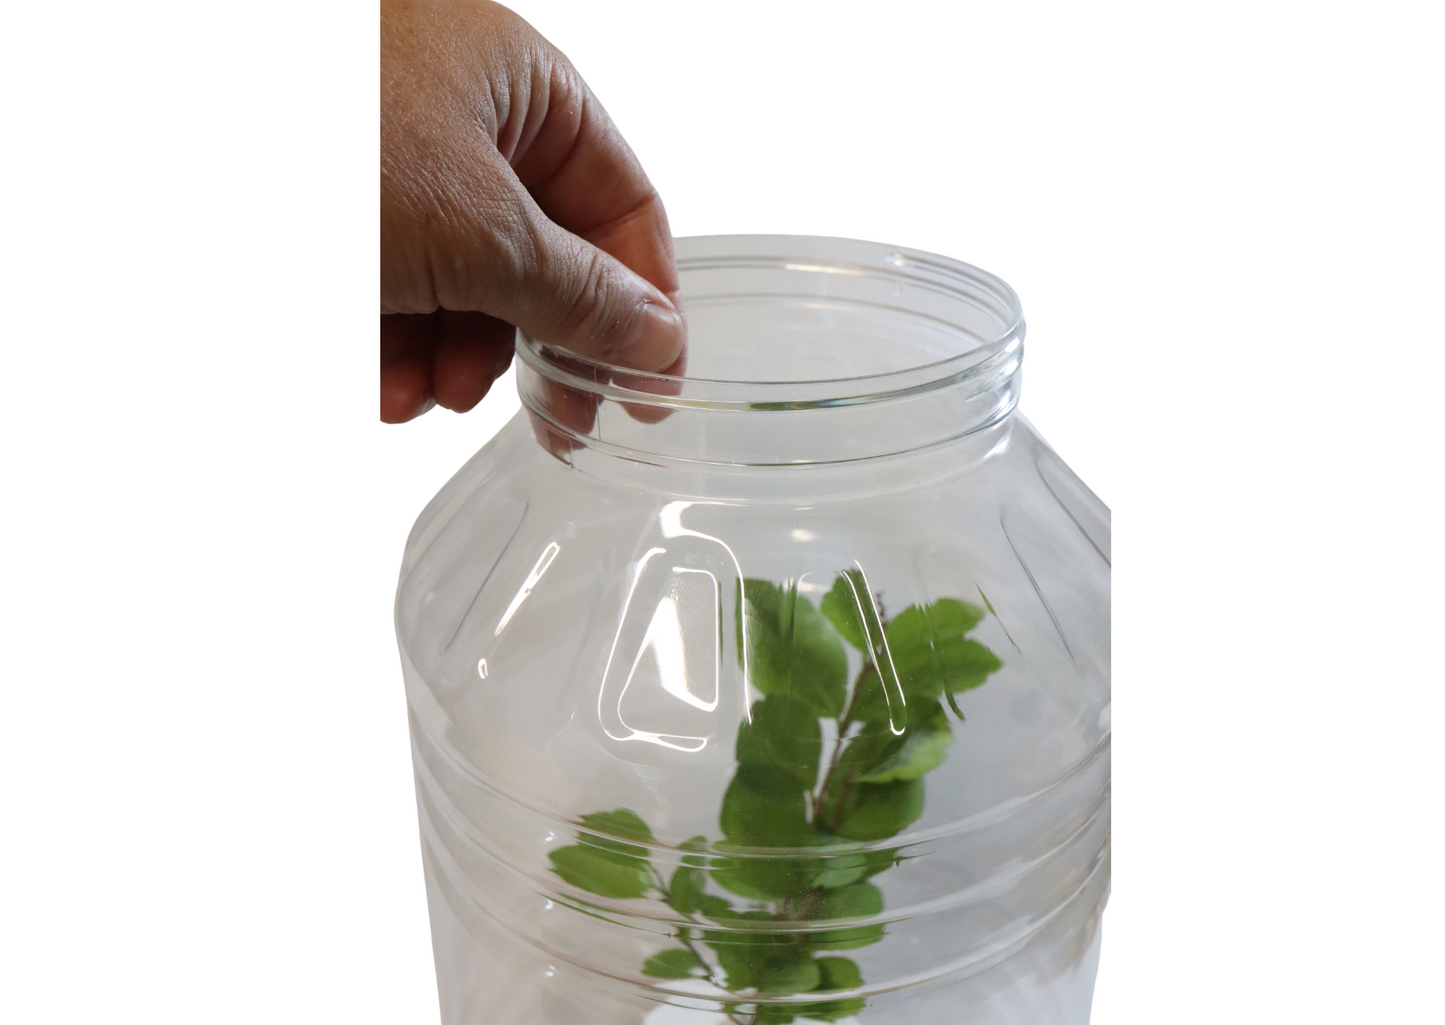 XXL Stick Insect Jar Including Substrate & Twig Pot Coarse Mesh